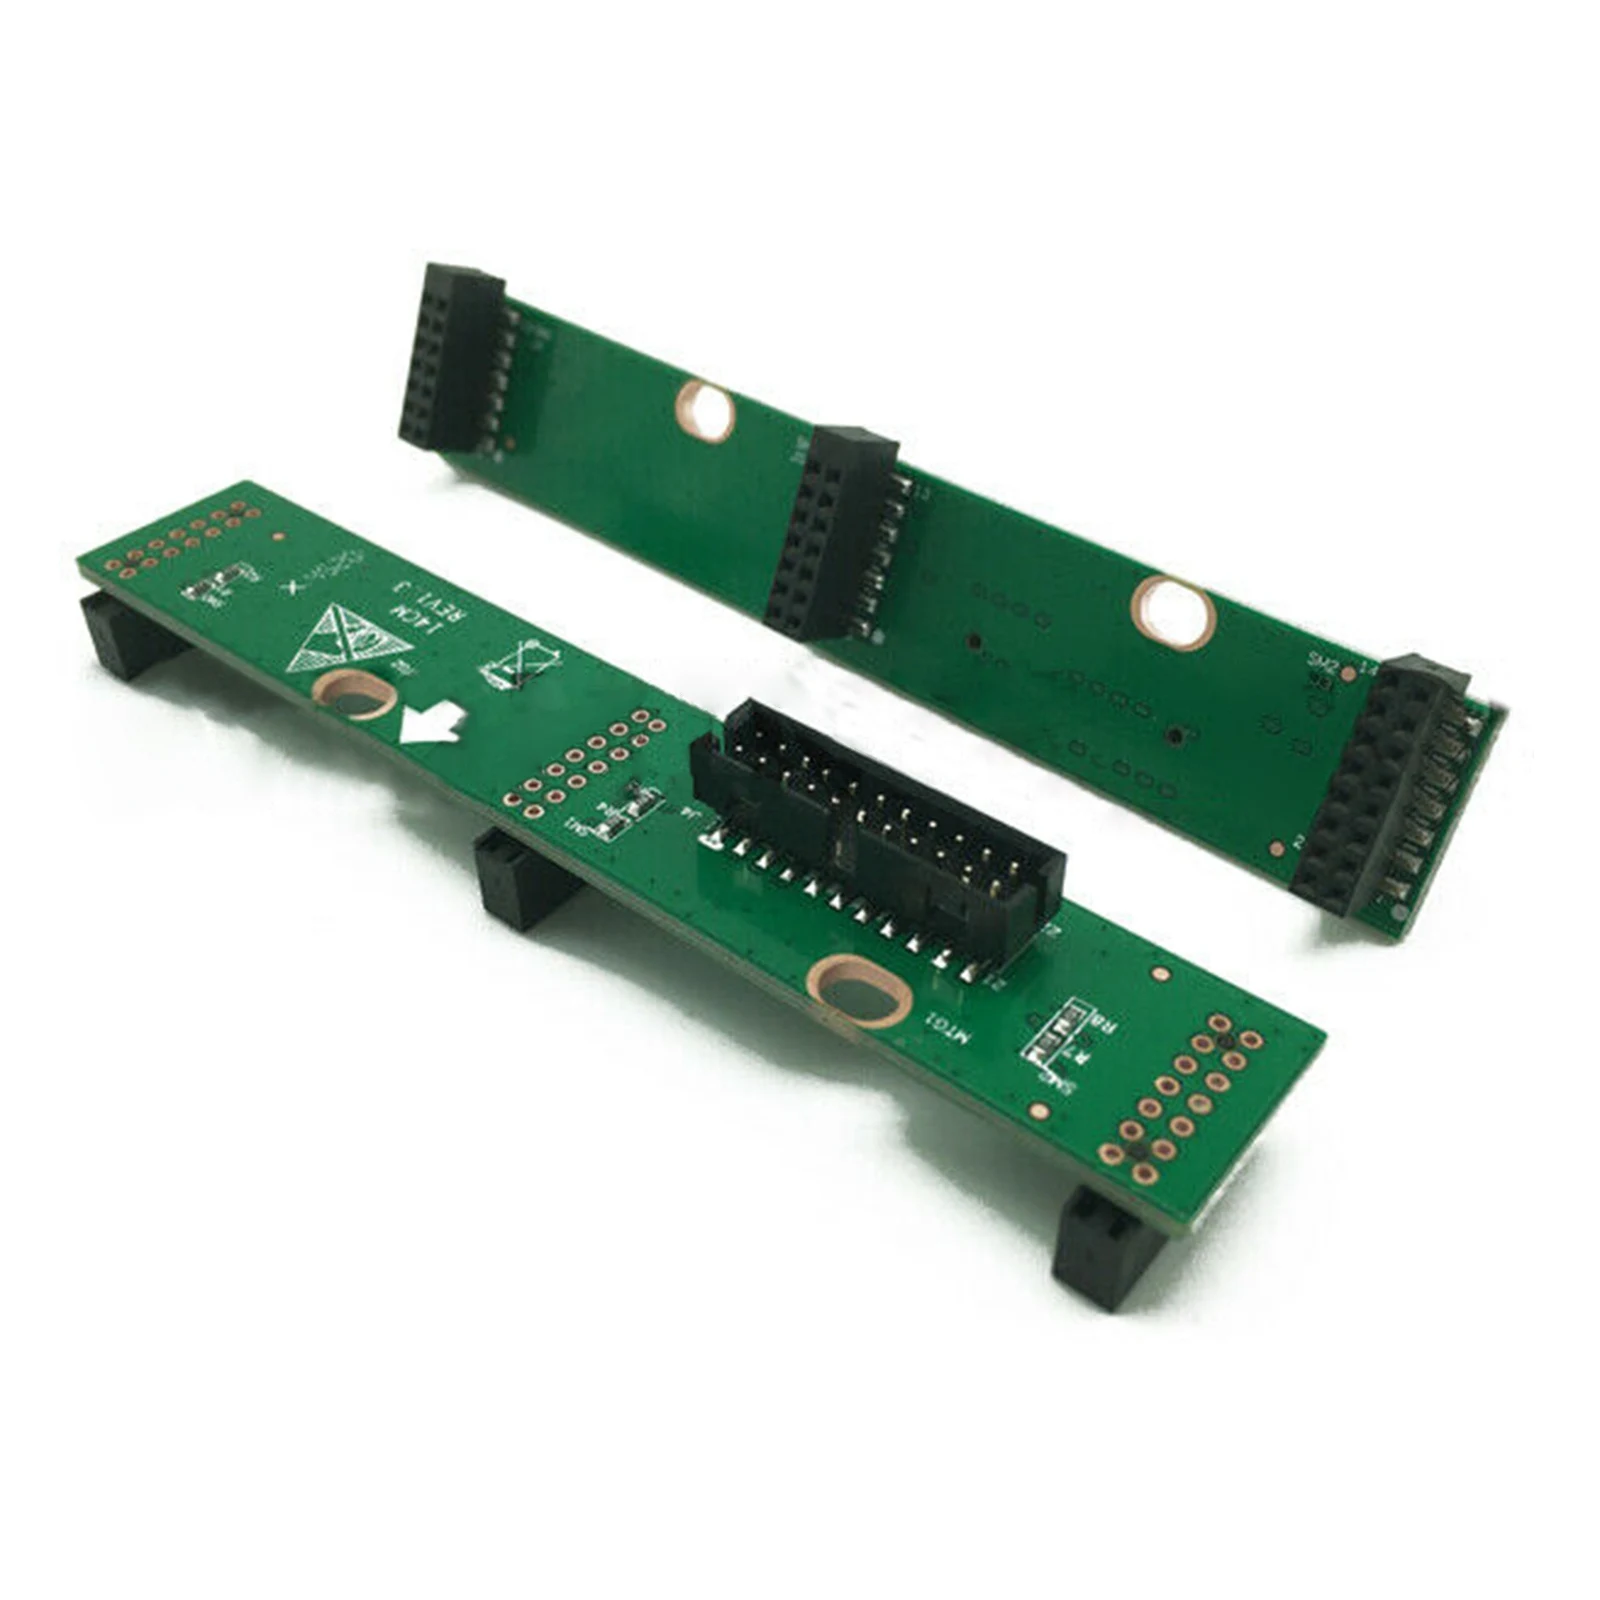 

New 1Pc 2Pcs Whatsminer Connector Btwn Hashboard and Control Board M20/M30/M21S SERIES 3 in 1